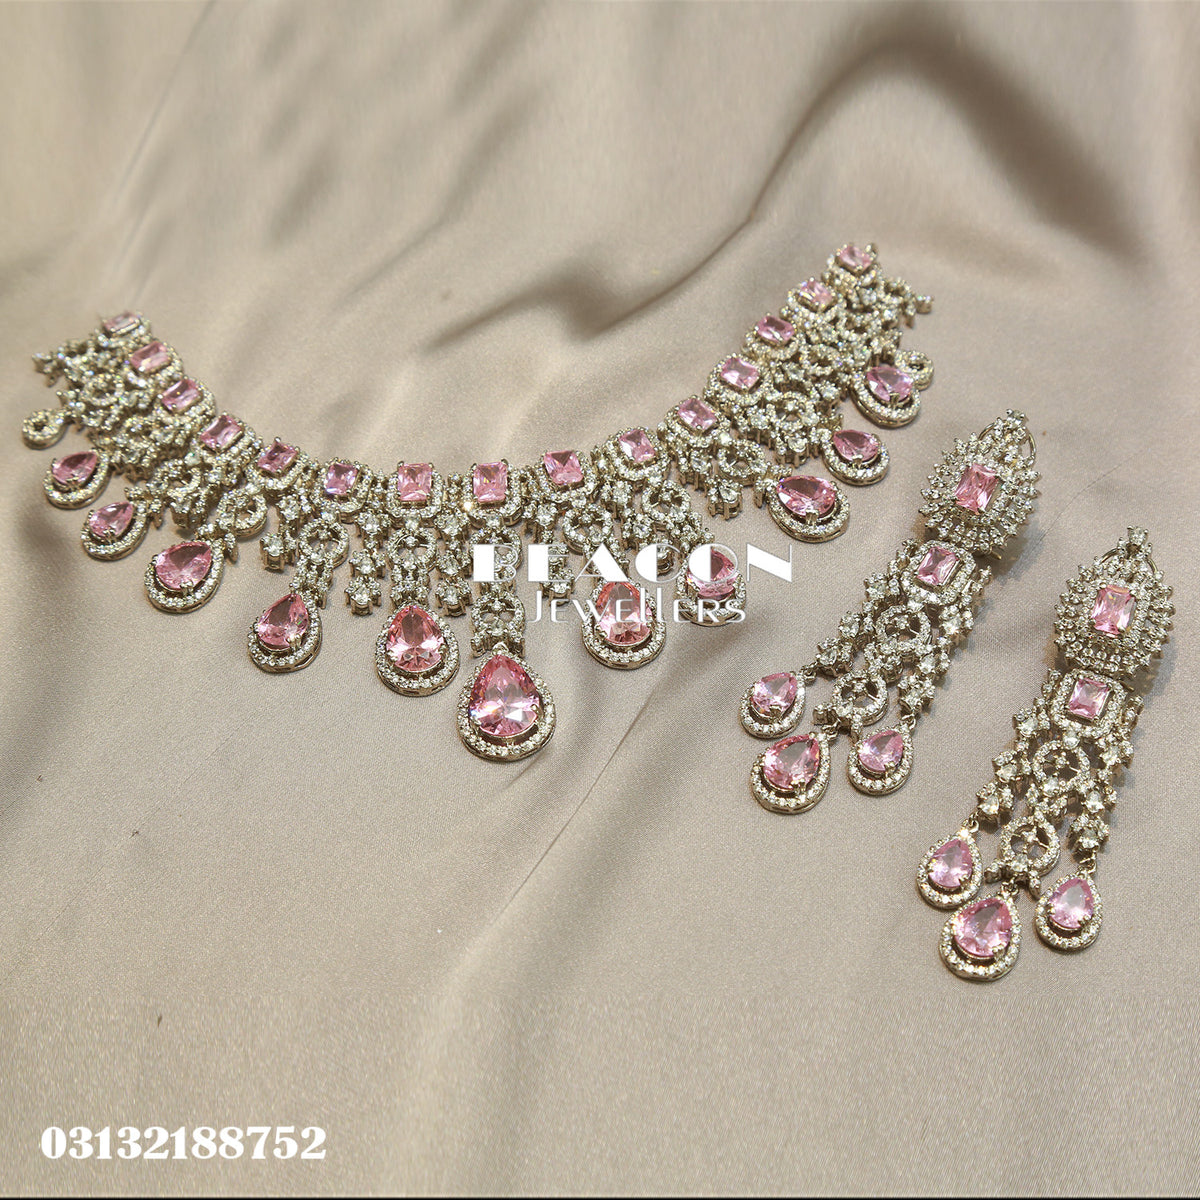 Necklace and Earrings 83